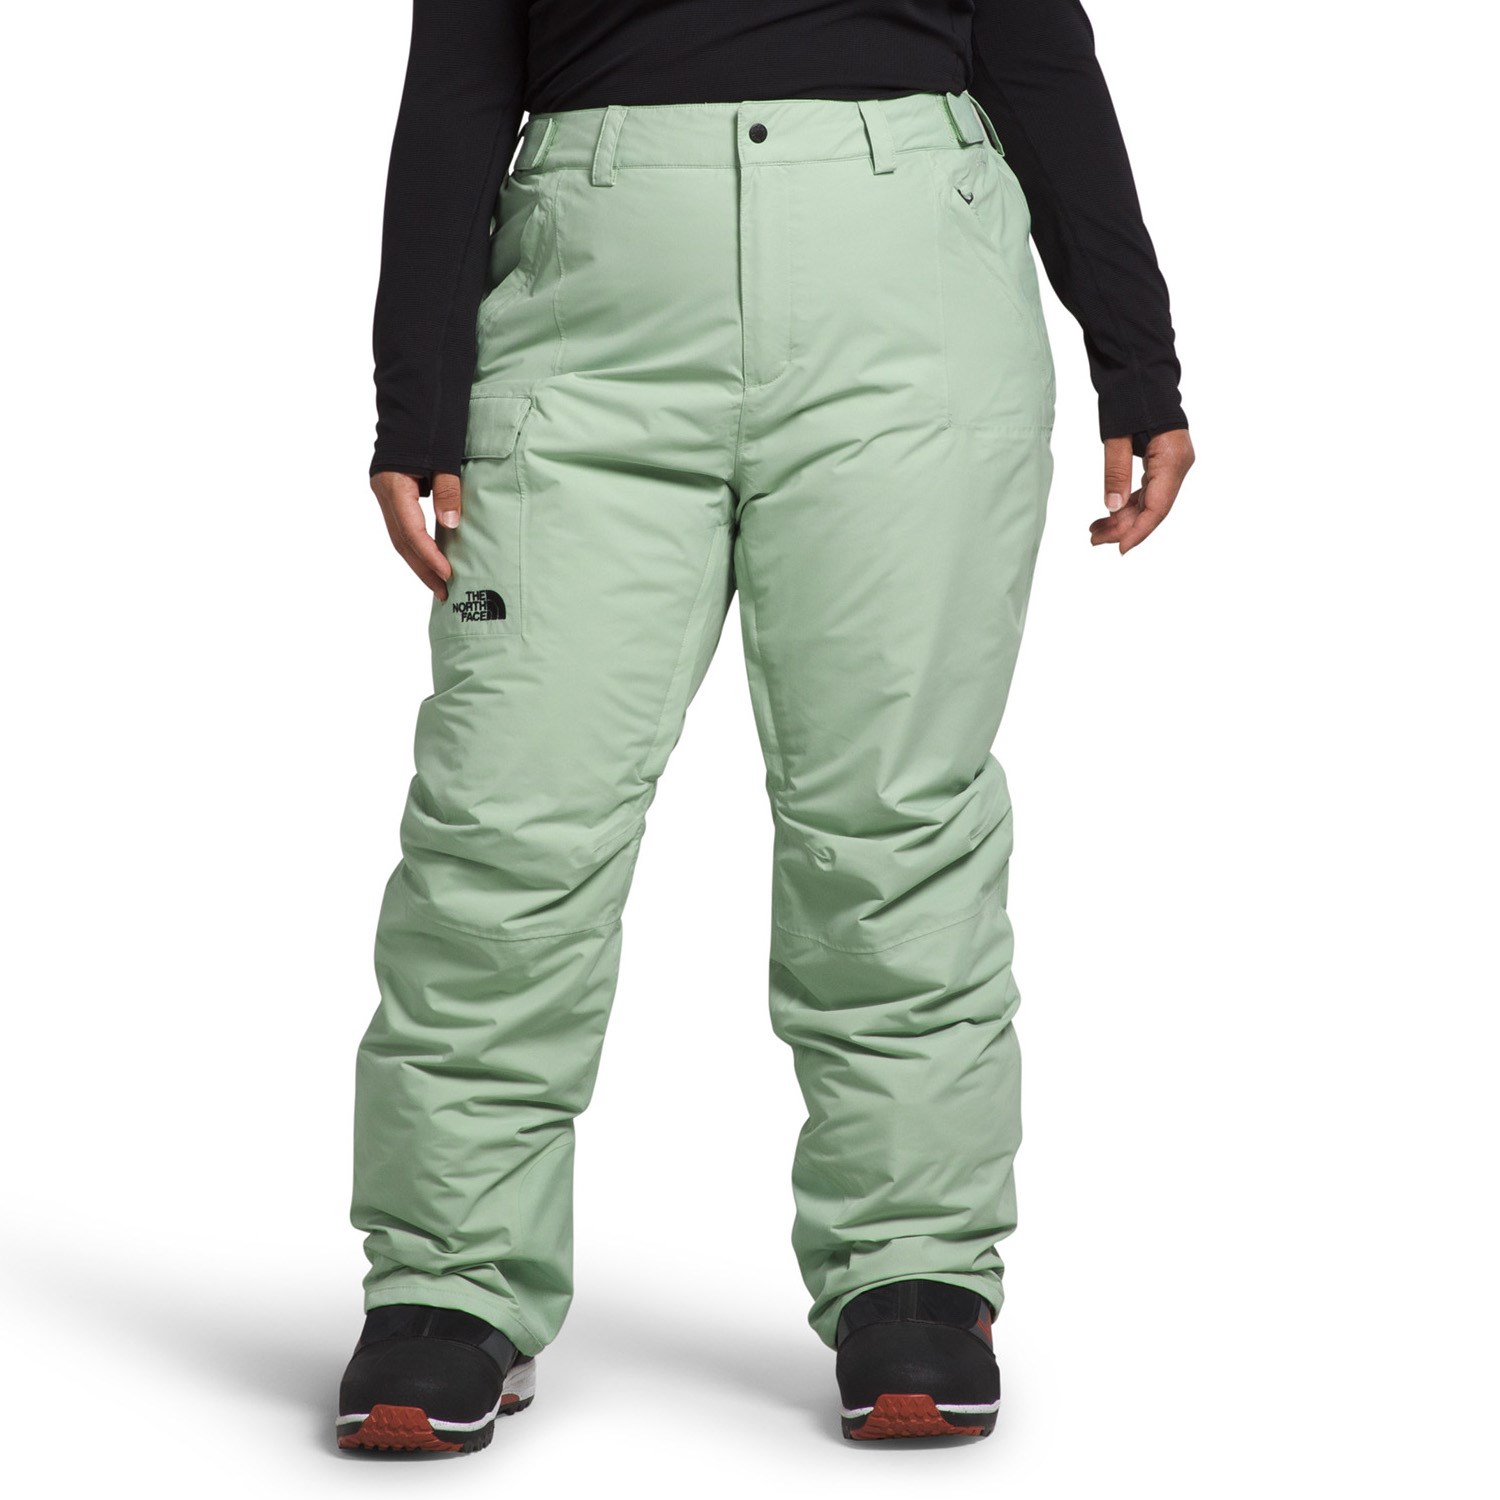 Брюки The North Face Freedom Insulated Plus, цвет Misty Sage брюки the north face freedom insulated plus tall цвет mr pink expedition print